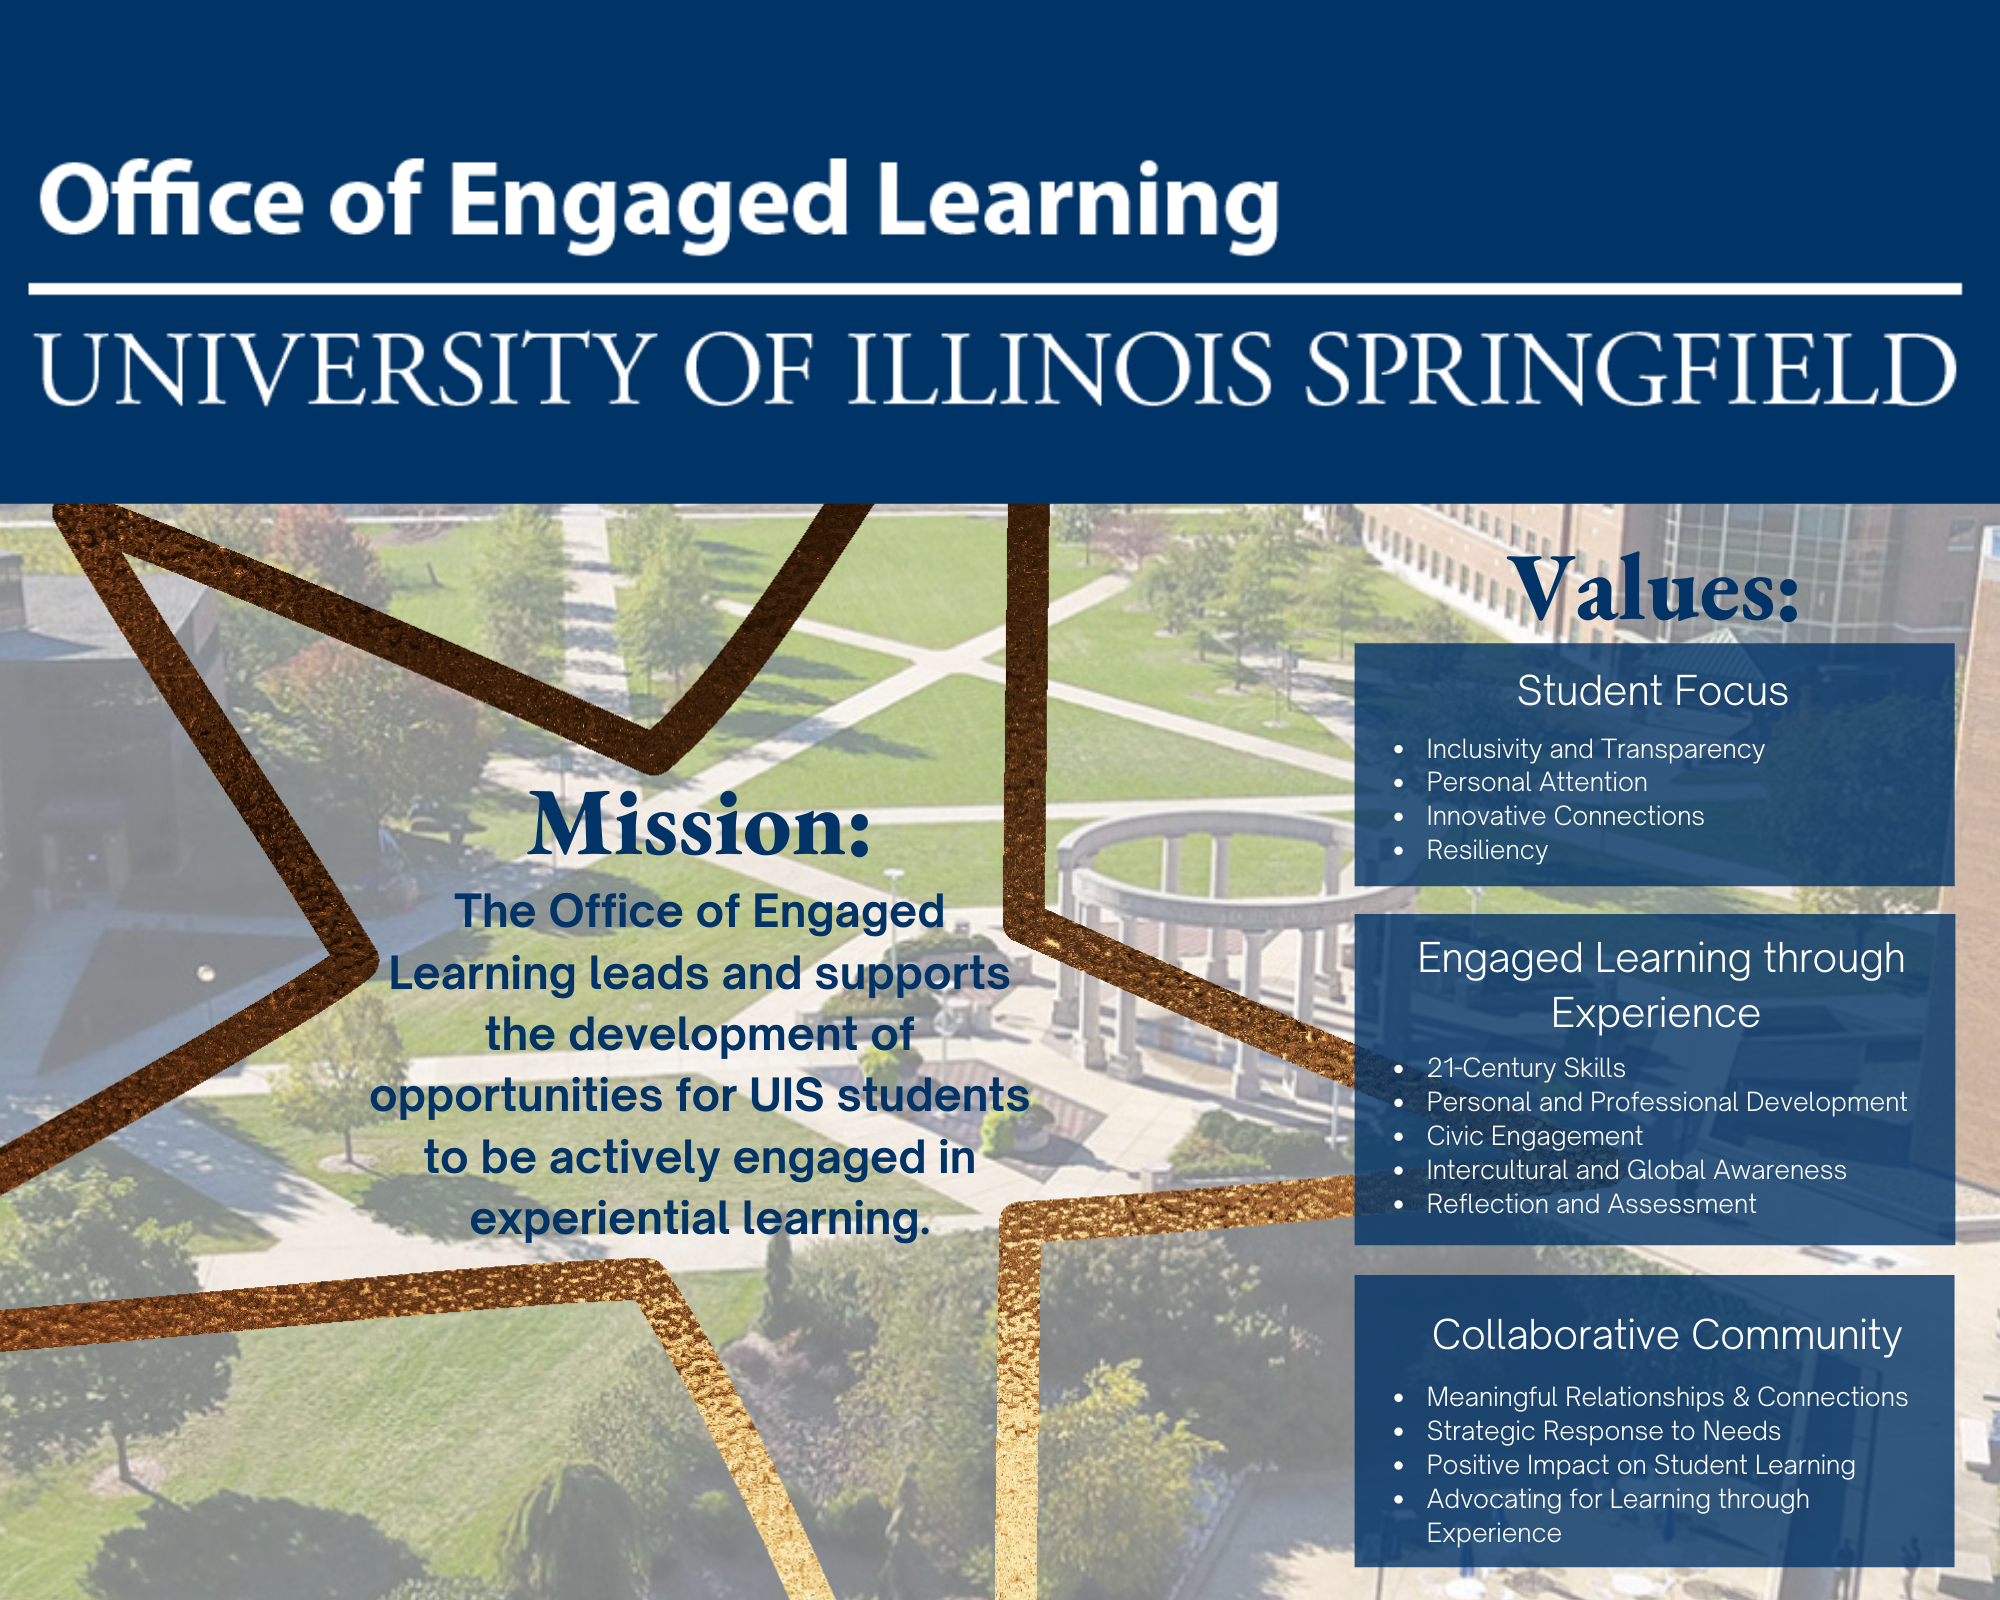 Our Mission
The Office of Engaged Learning leads and supports the development of opportunities for UIS students to be actively engaged in experiential learning.

Our Values
Student Focus
Inclusivity and Transparency
Personal Attention
Innovative Connections
Resiliency

Engaged Learning through Experience
21-Century Skills
Personal and Professional Development
Civic Engagement
Intercultural and Global Awareness
Reflection and Assessment

Collaborative Community
Meaningful Relationships & Connections
Strategic Response to Needs
Positive Impact on Student Learning
Advocating for Learning through Experience

